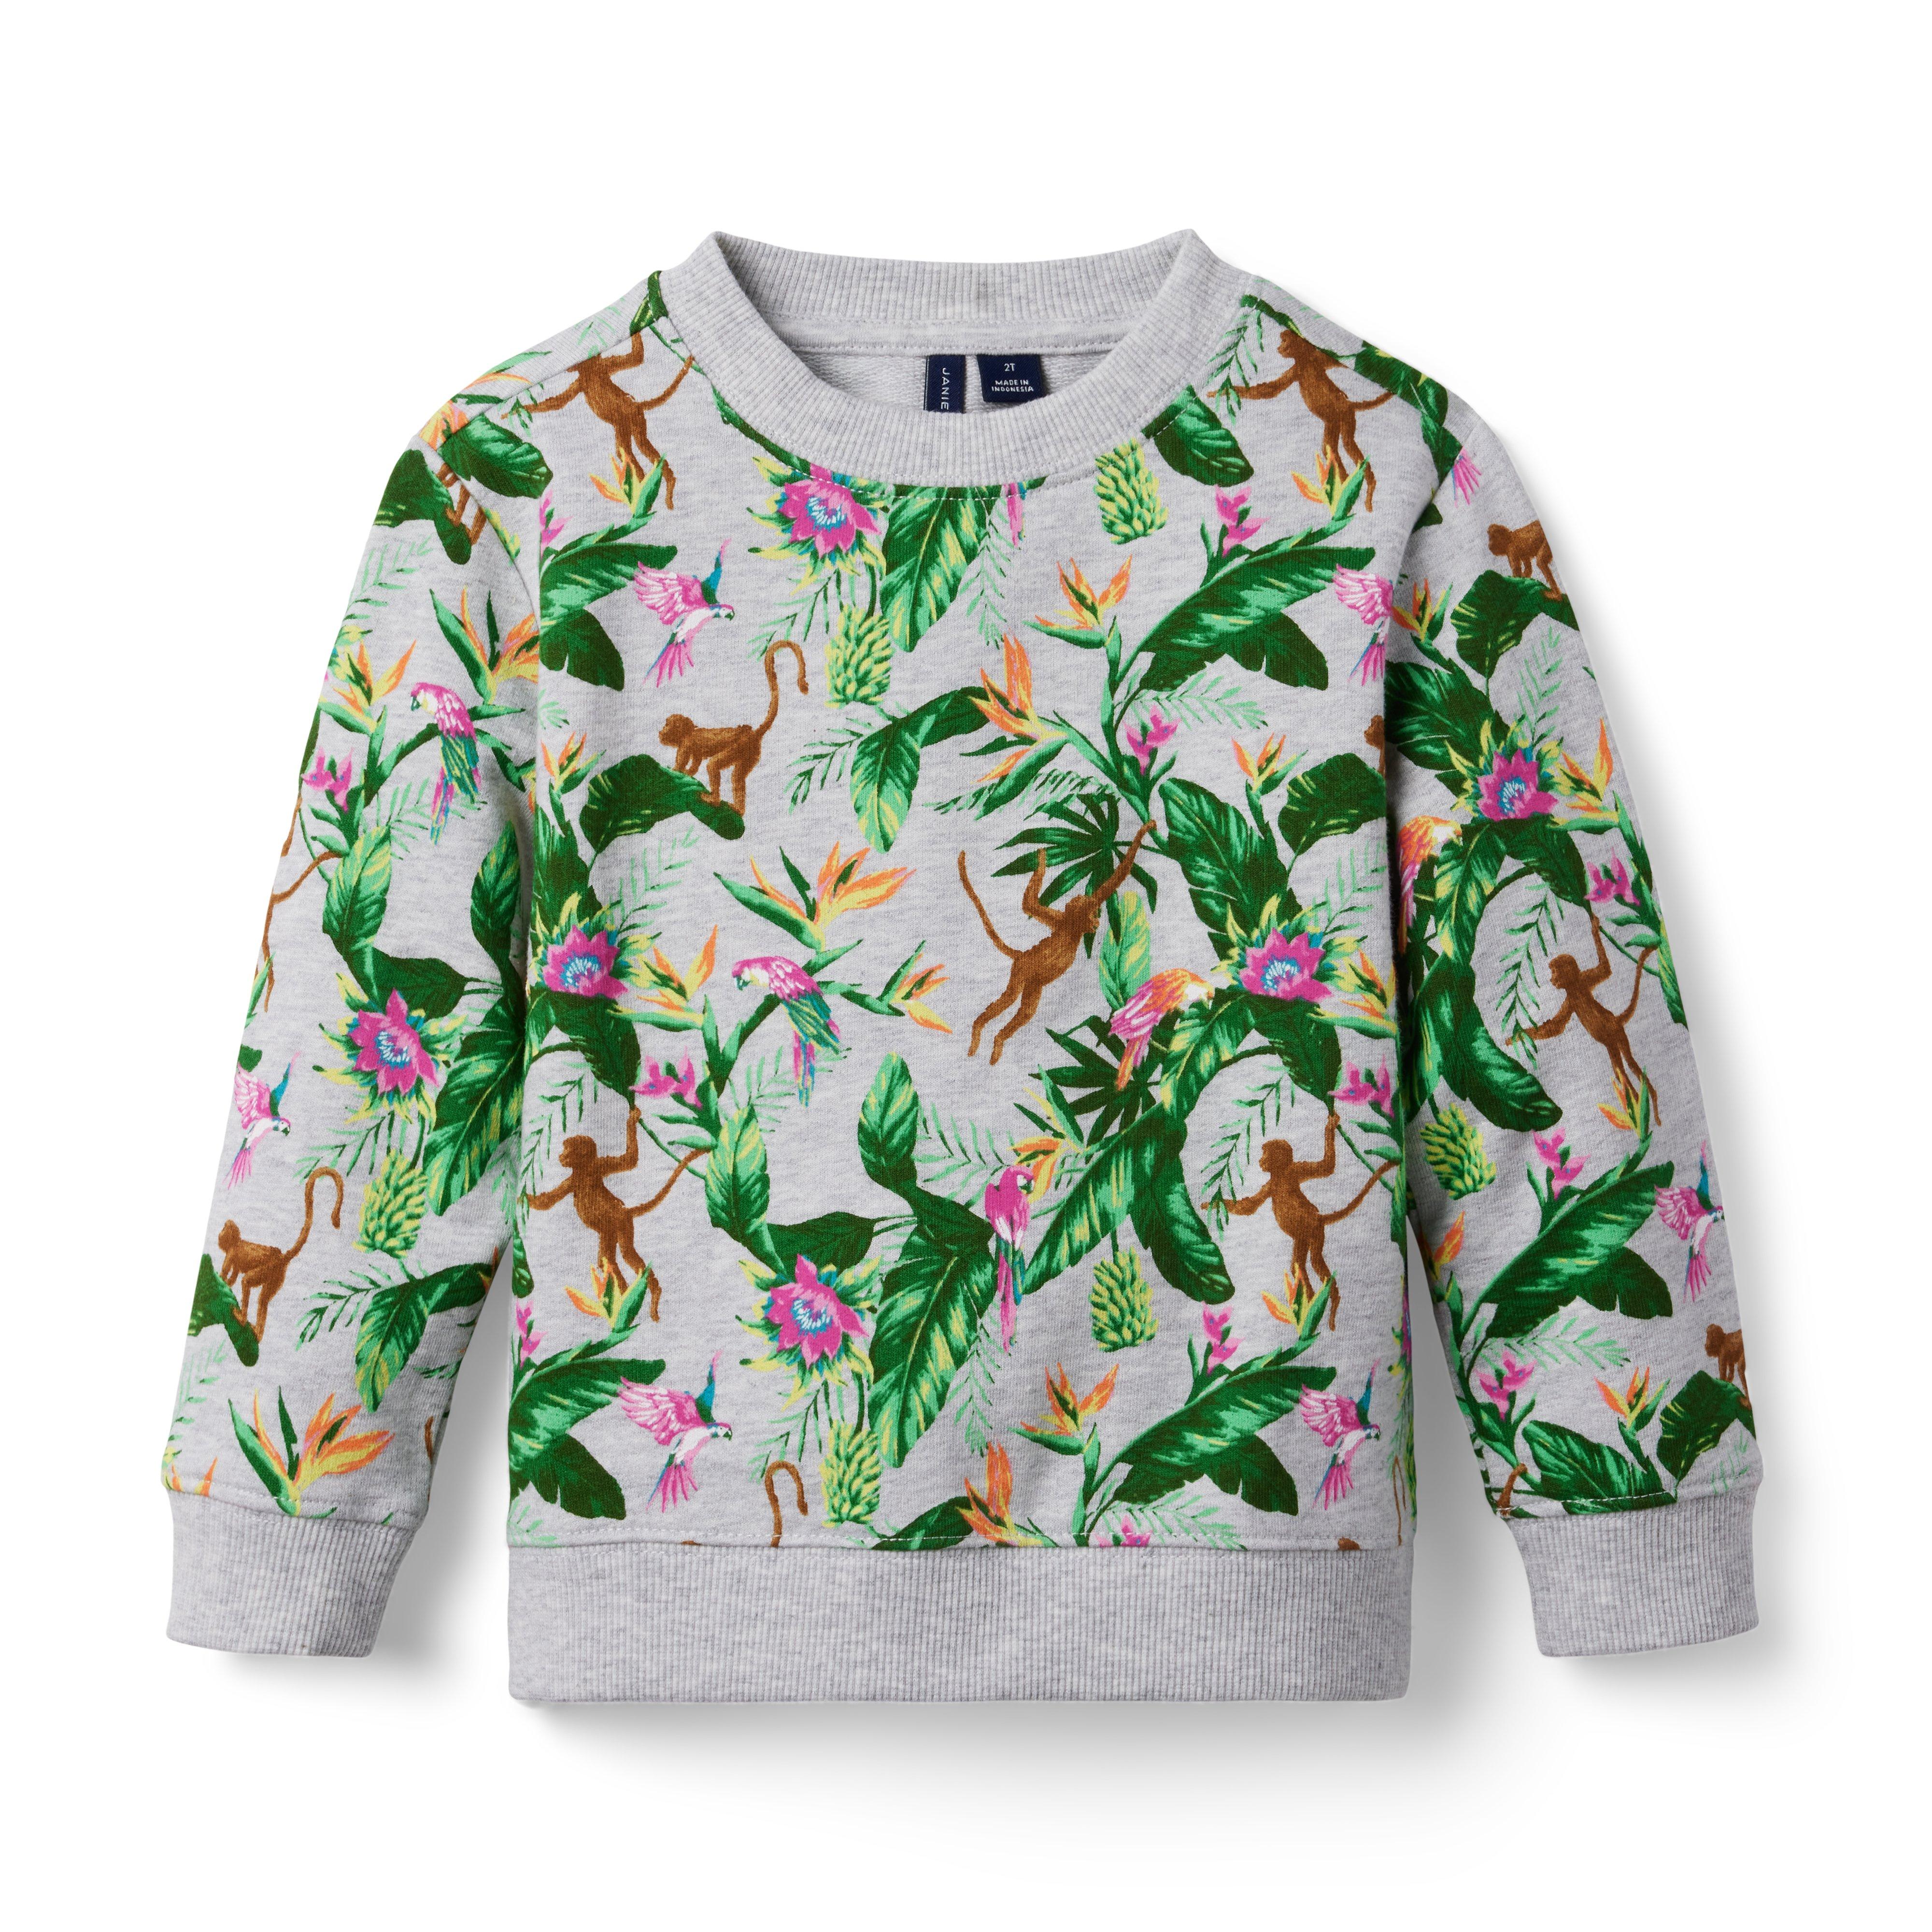 Tropical Jungle French Terry Sweatshirt 